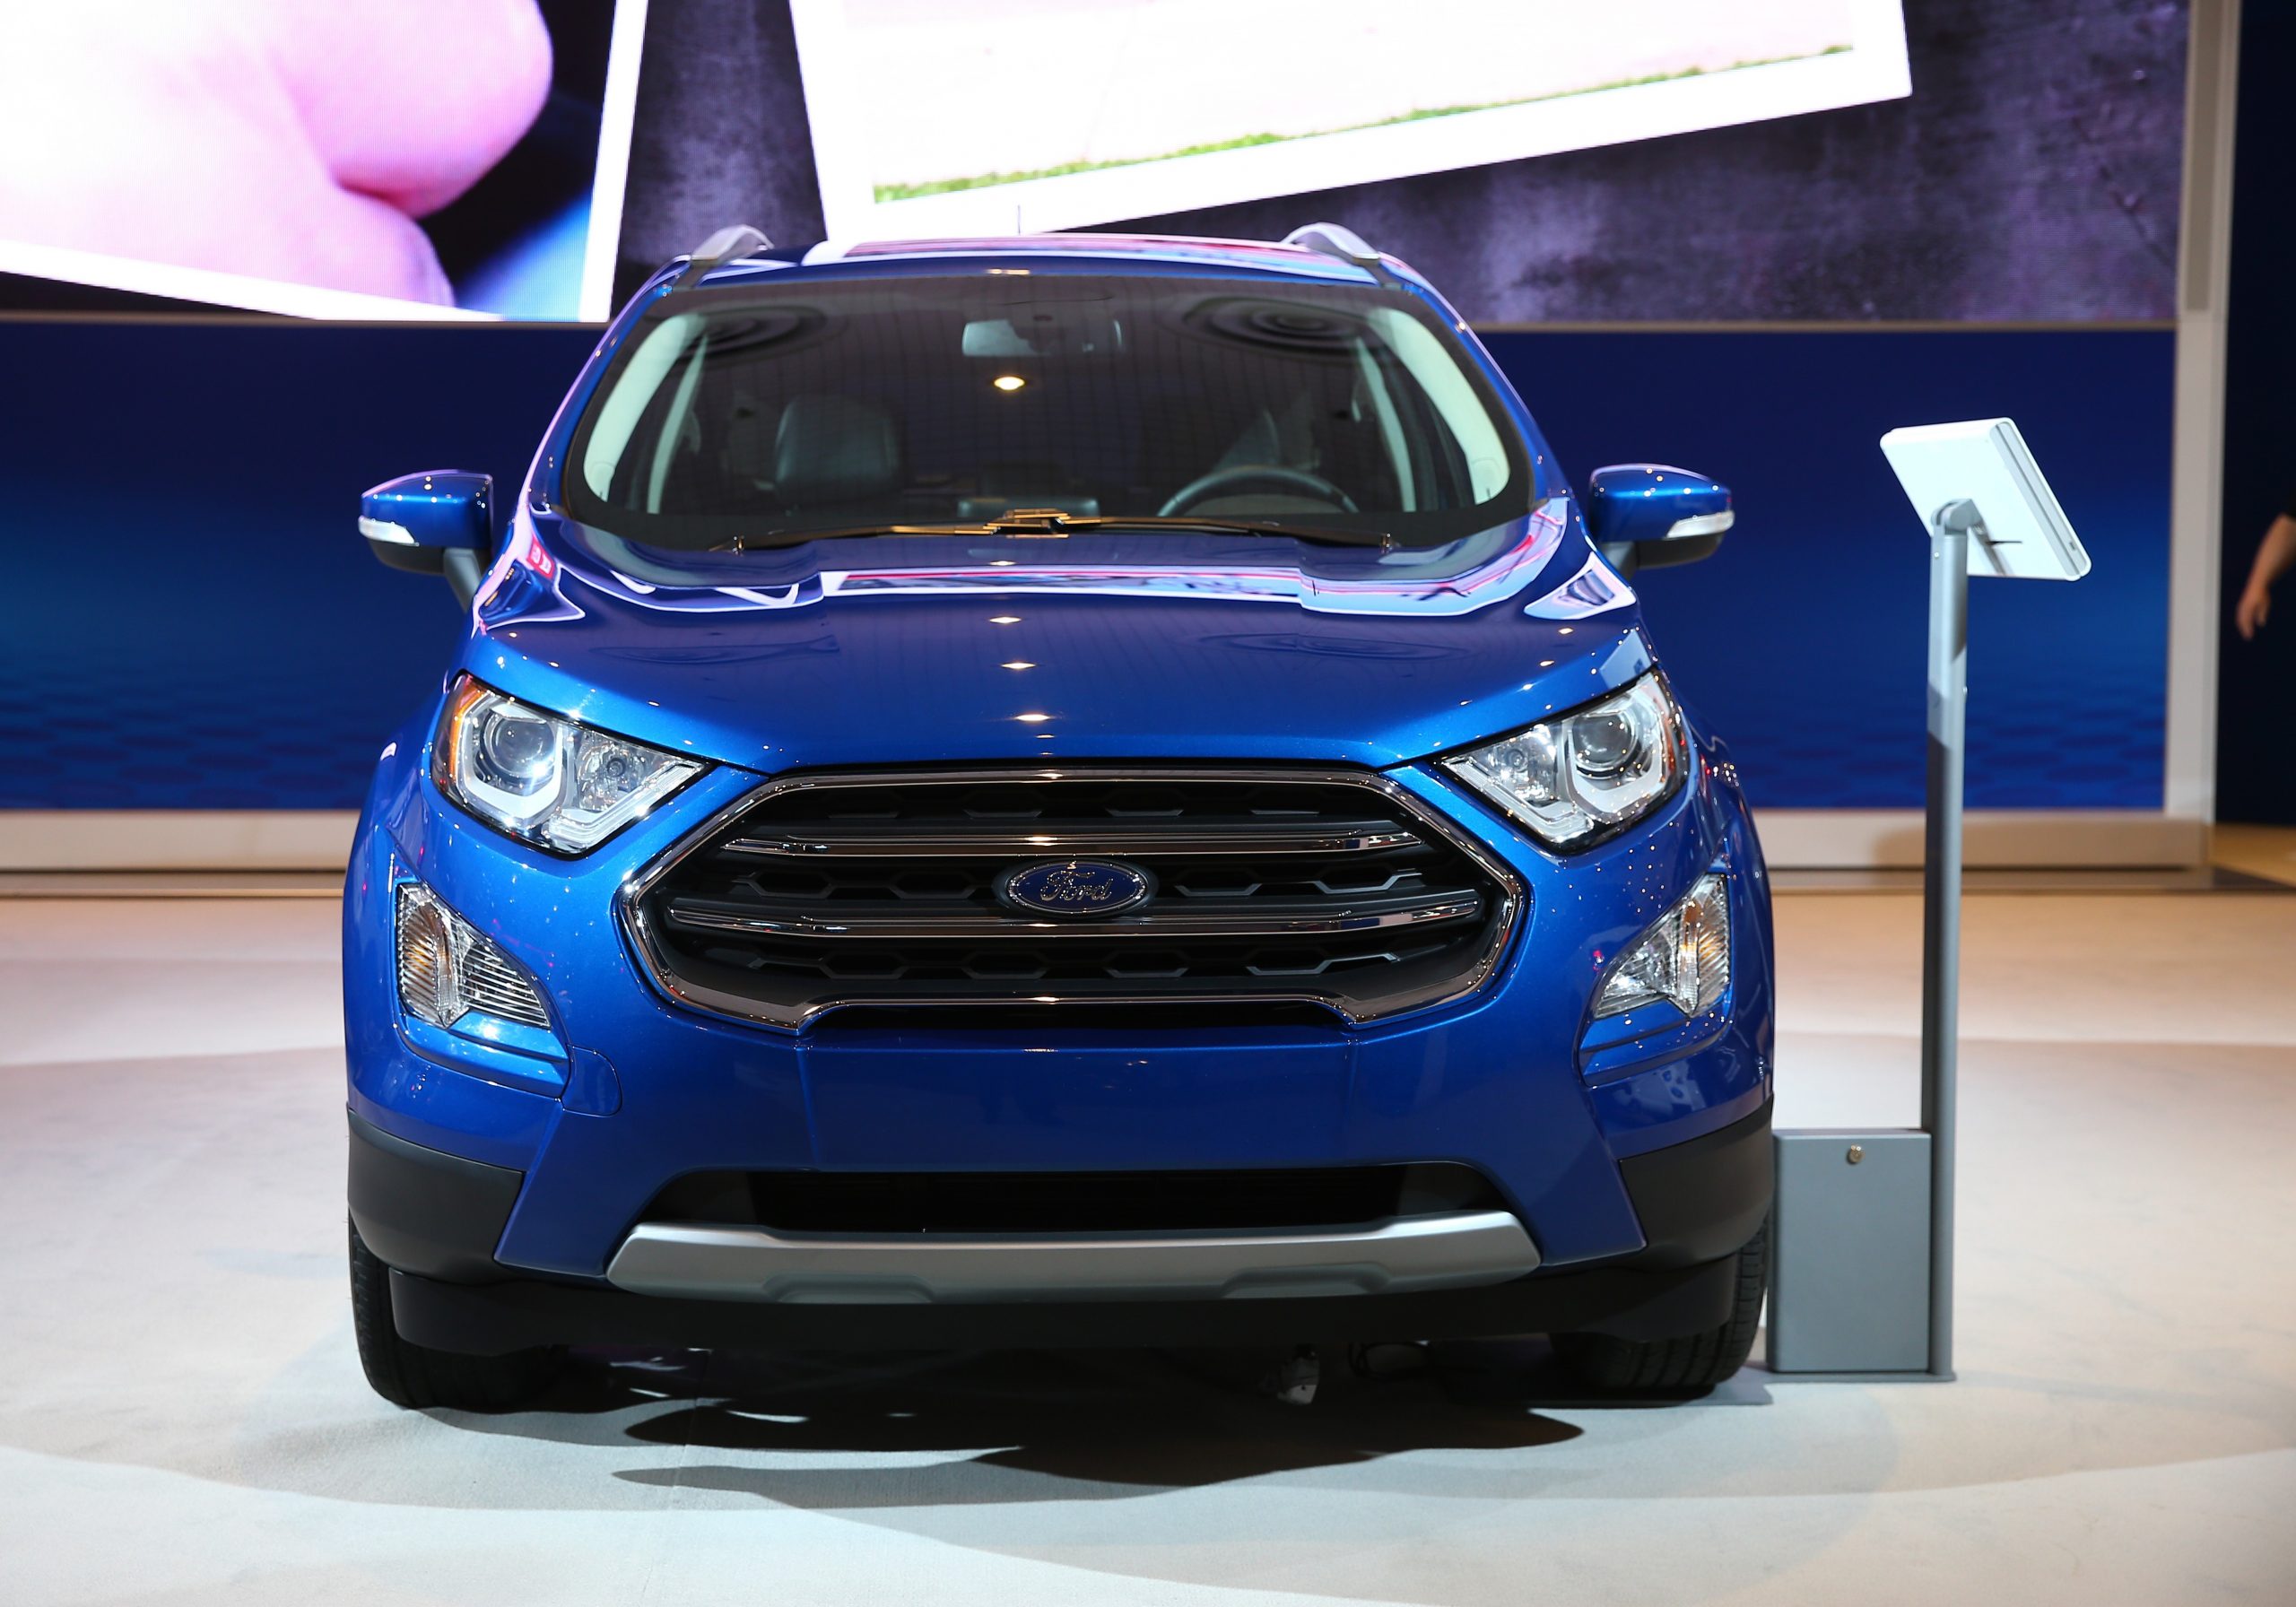 A blue Ford EcoSport on display at an auto show